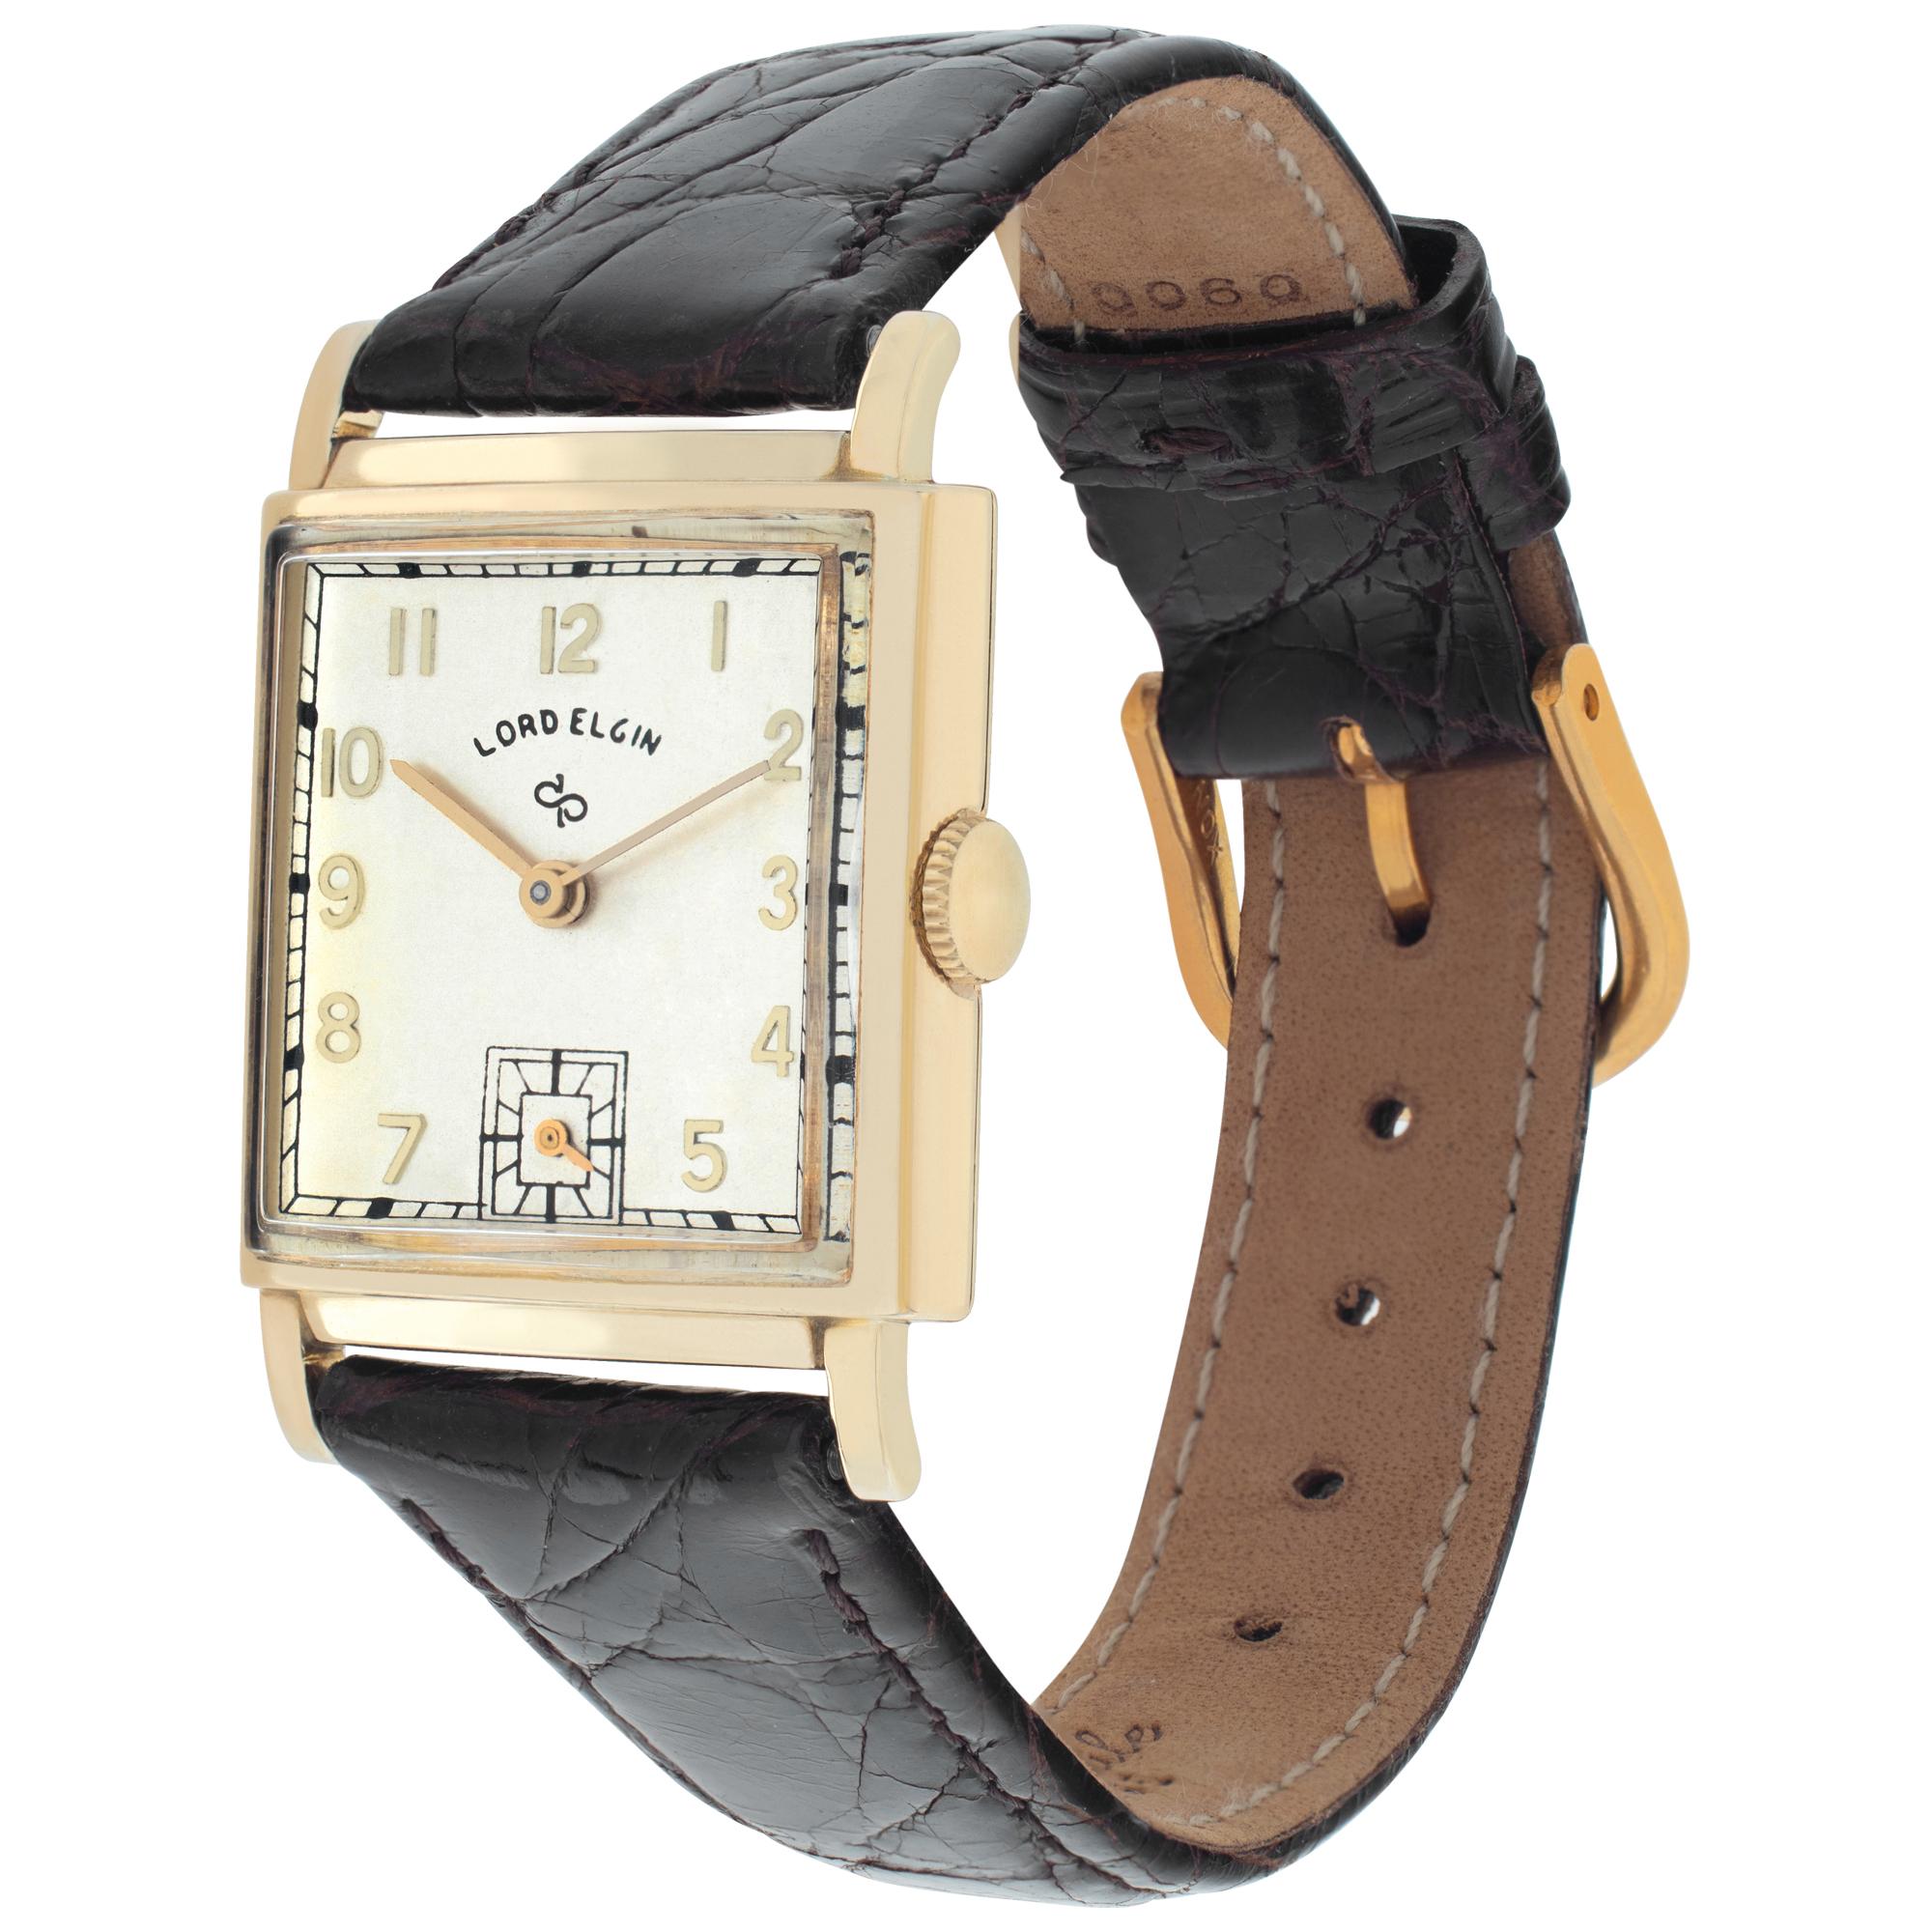 Lord Elgin Classic in 14k on leather strap. Manual w/ subseconds. 24 mm case size. Fine Pre-owned Lord Elgin Watch. Certified preowned Vintage Lord Elgin Classic watch is made out of yellow gold on a Brown Leather strap with a tang buckle. This Lord